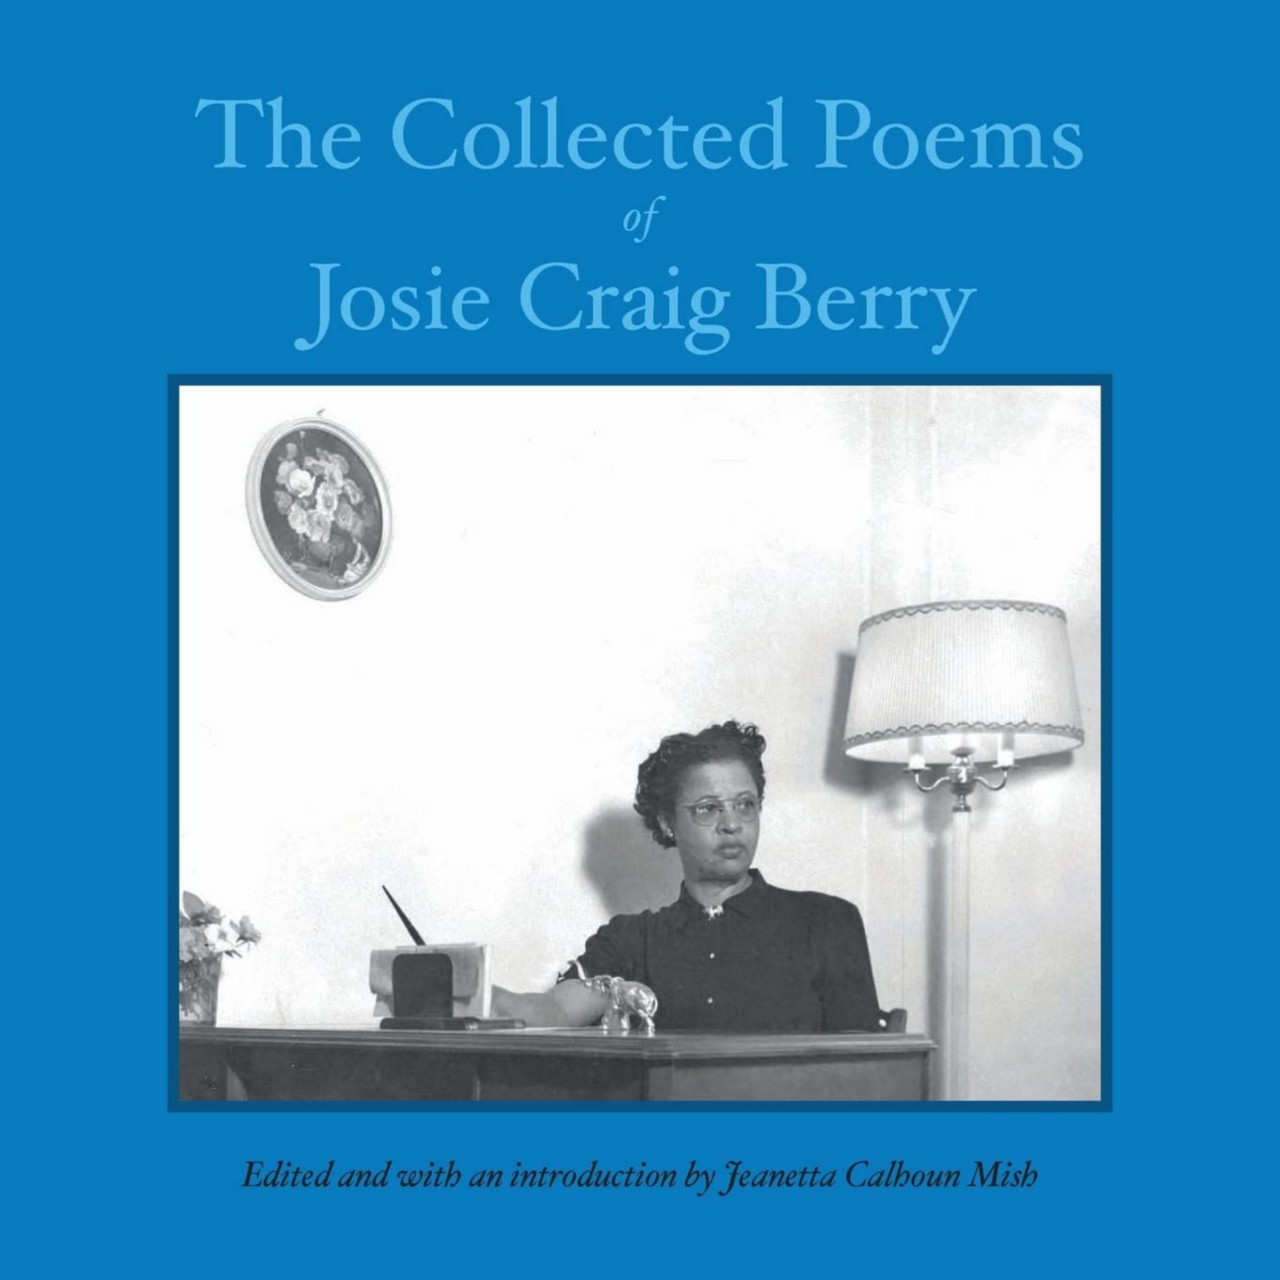 The Collected Poems of Josie Craig Berry edited and introduction by Jeanetta Calhoun Mish 